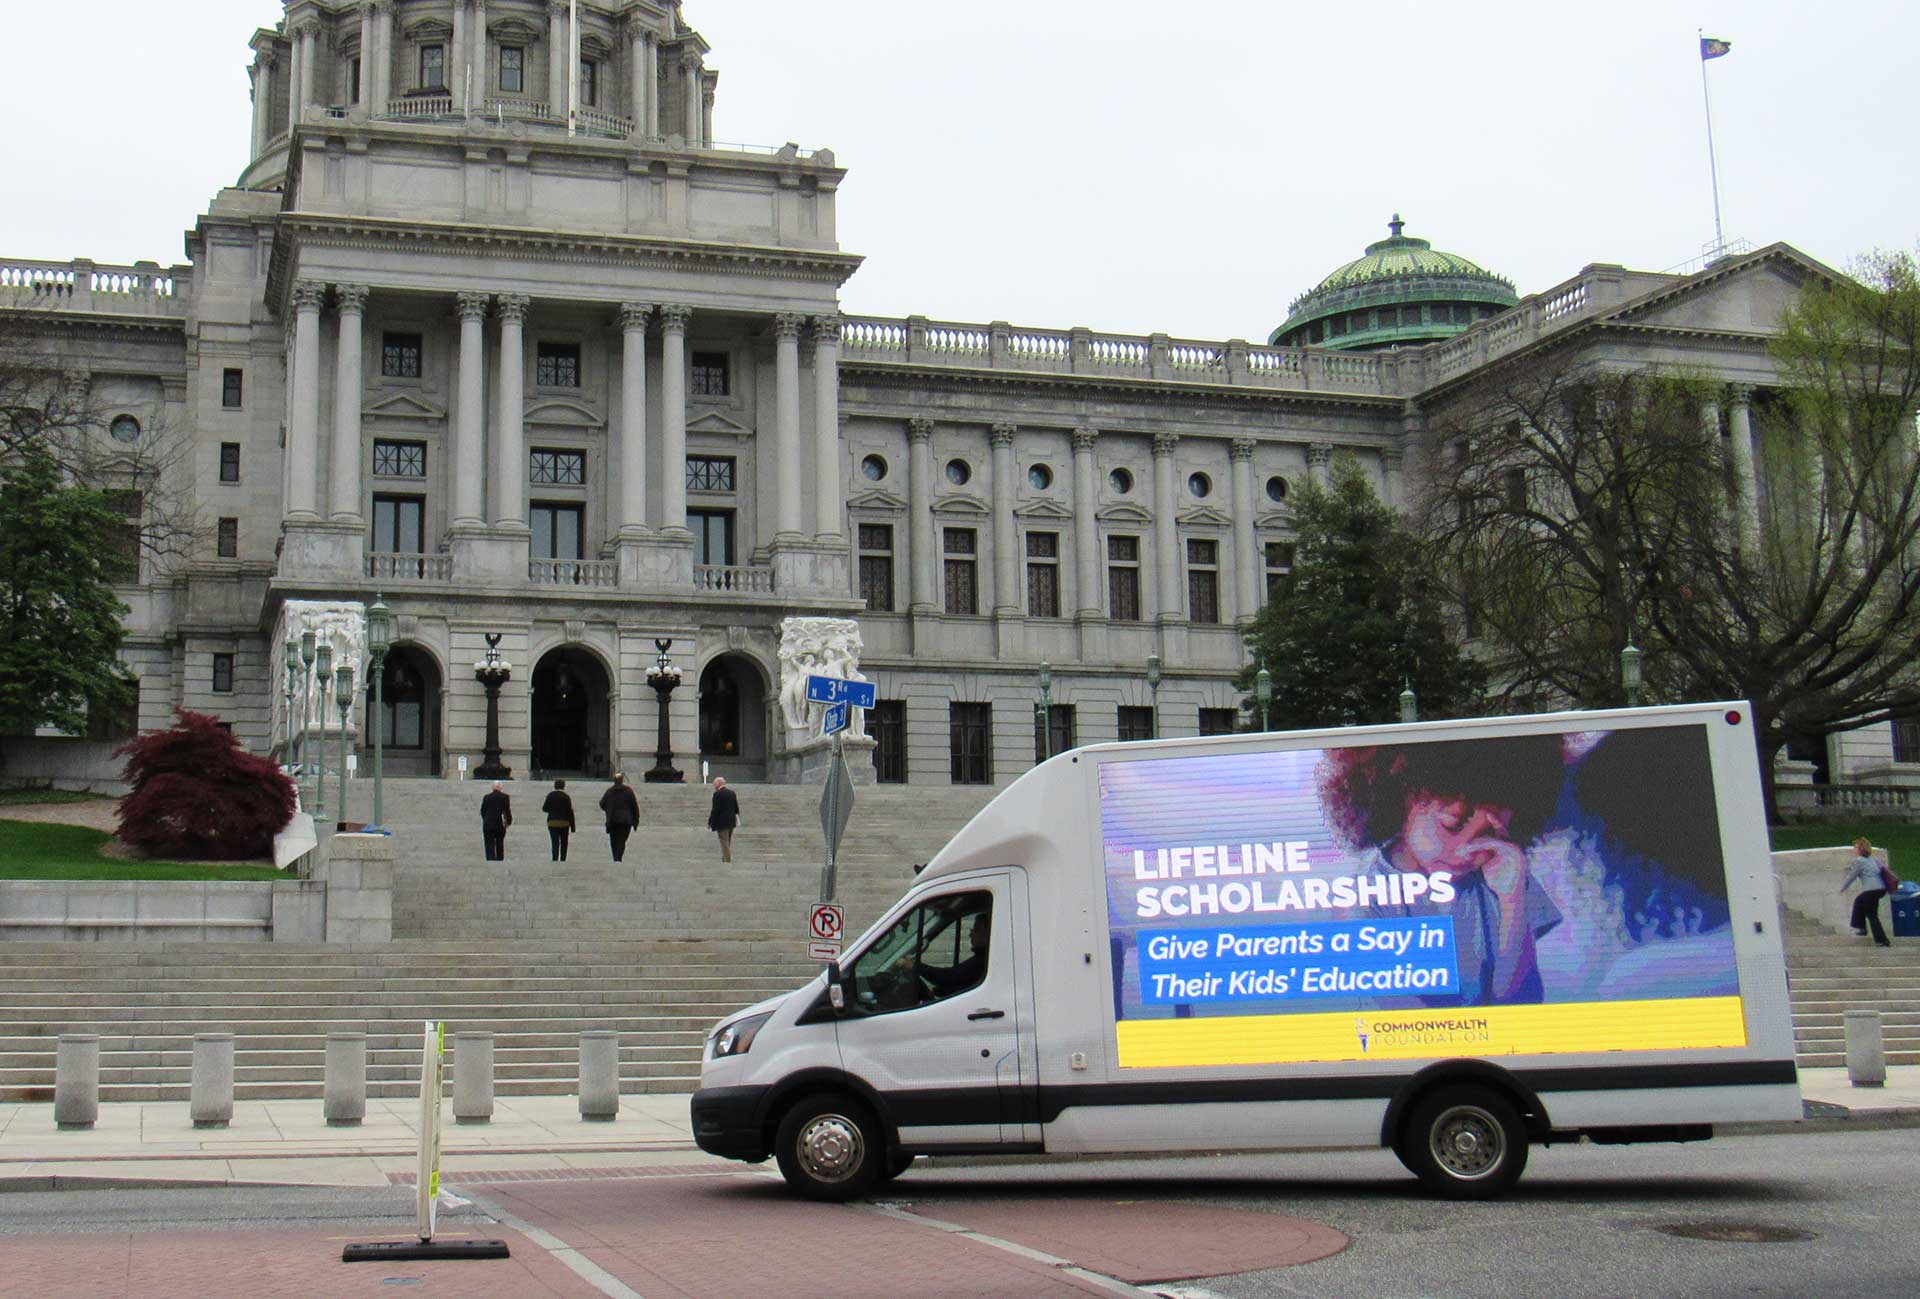 LED Digital mobile billboard truck parked in front of the Pennsylvania State Capitol in Harrisburg